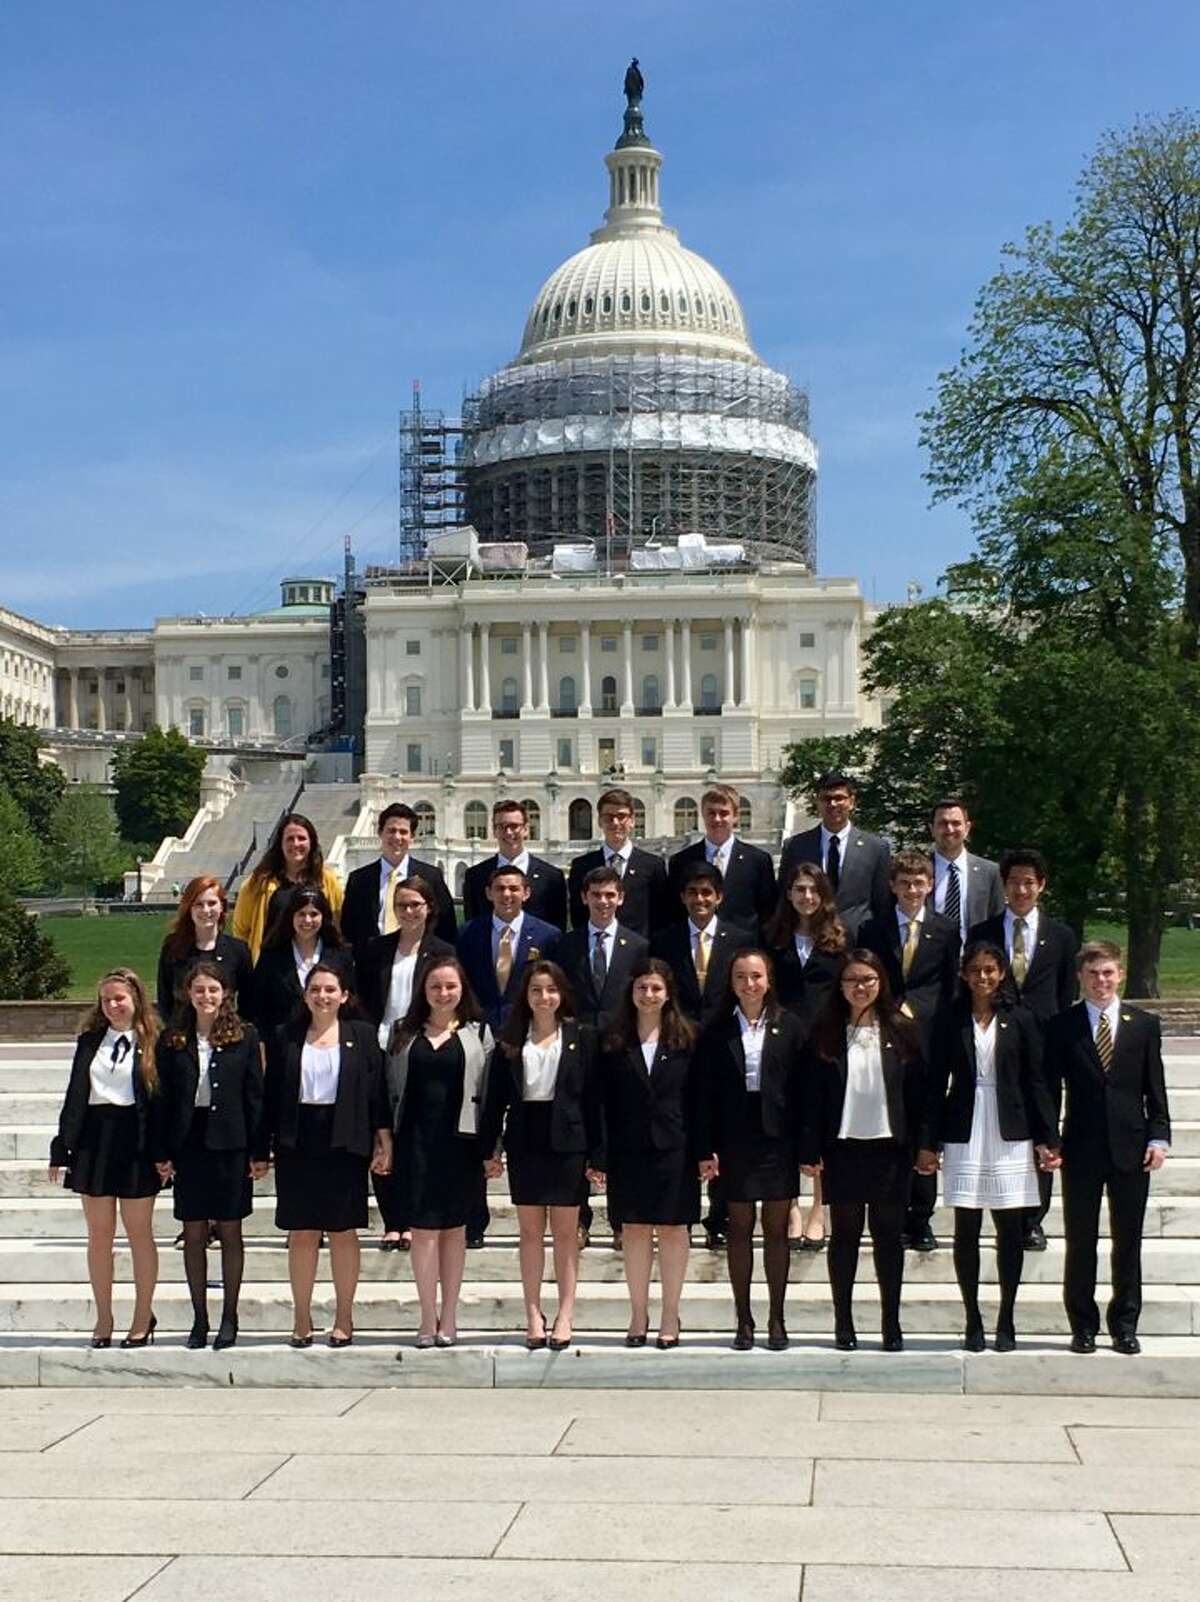 Trumbull High School's We the People team poses in the nation's capital Monday, April 24 after its eighth place finish at the national final competition.